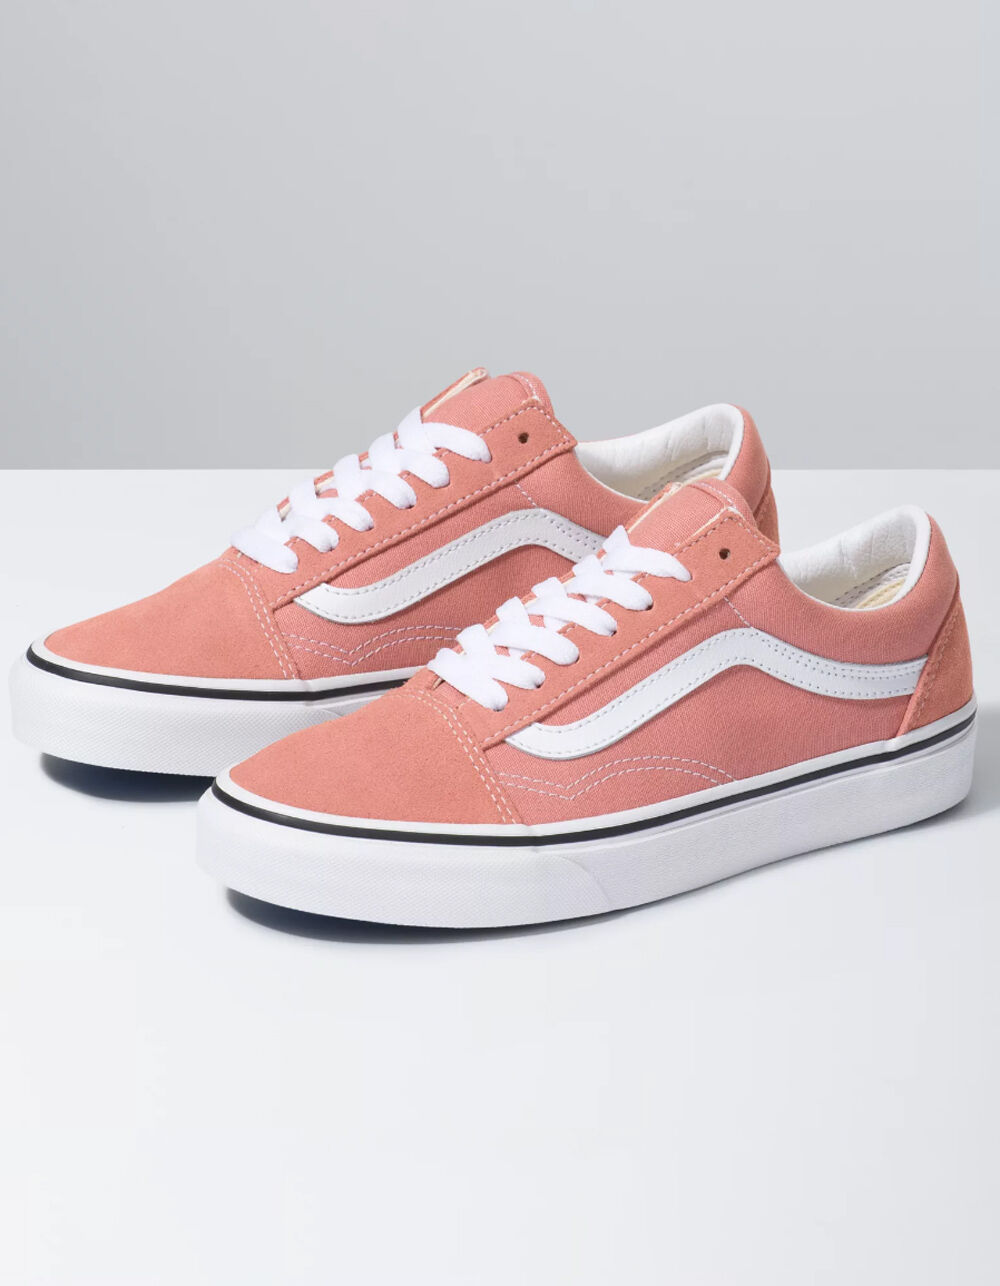 heroic mourning Normalization VANS Old Skool Womens Rose Dawn & White Shoes - ROSE DAWN/TRUE WHITE |  Tillys